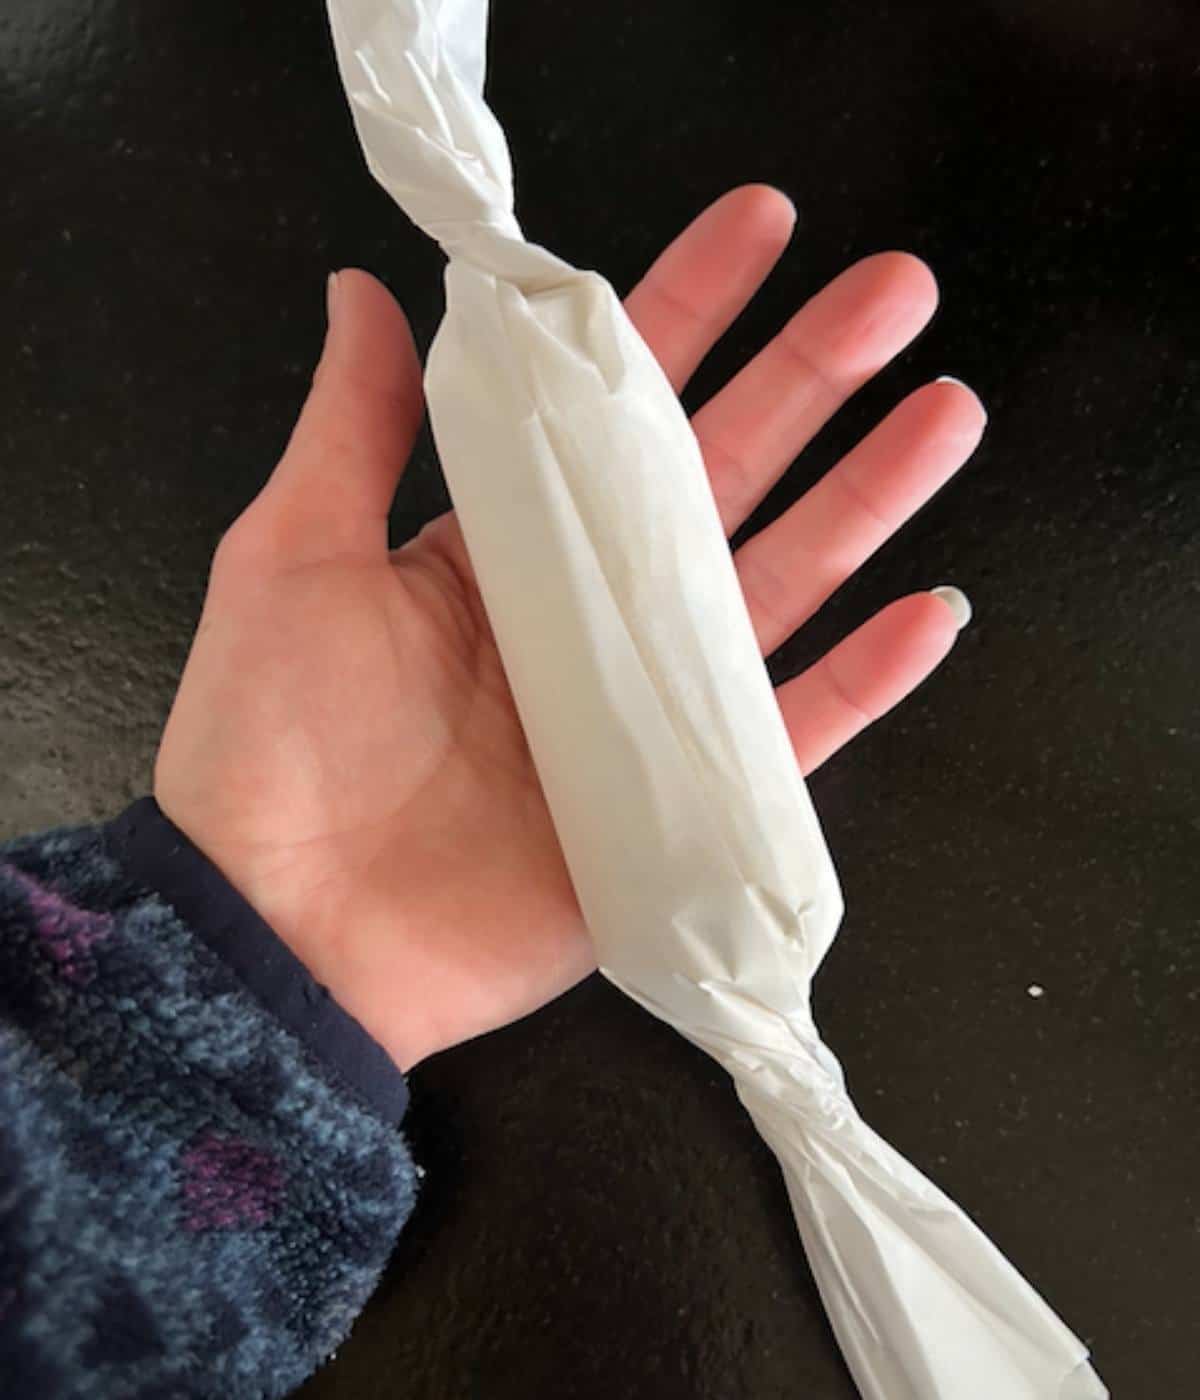 Hand holding garlic rosemary butter twisted inside parchment paper.